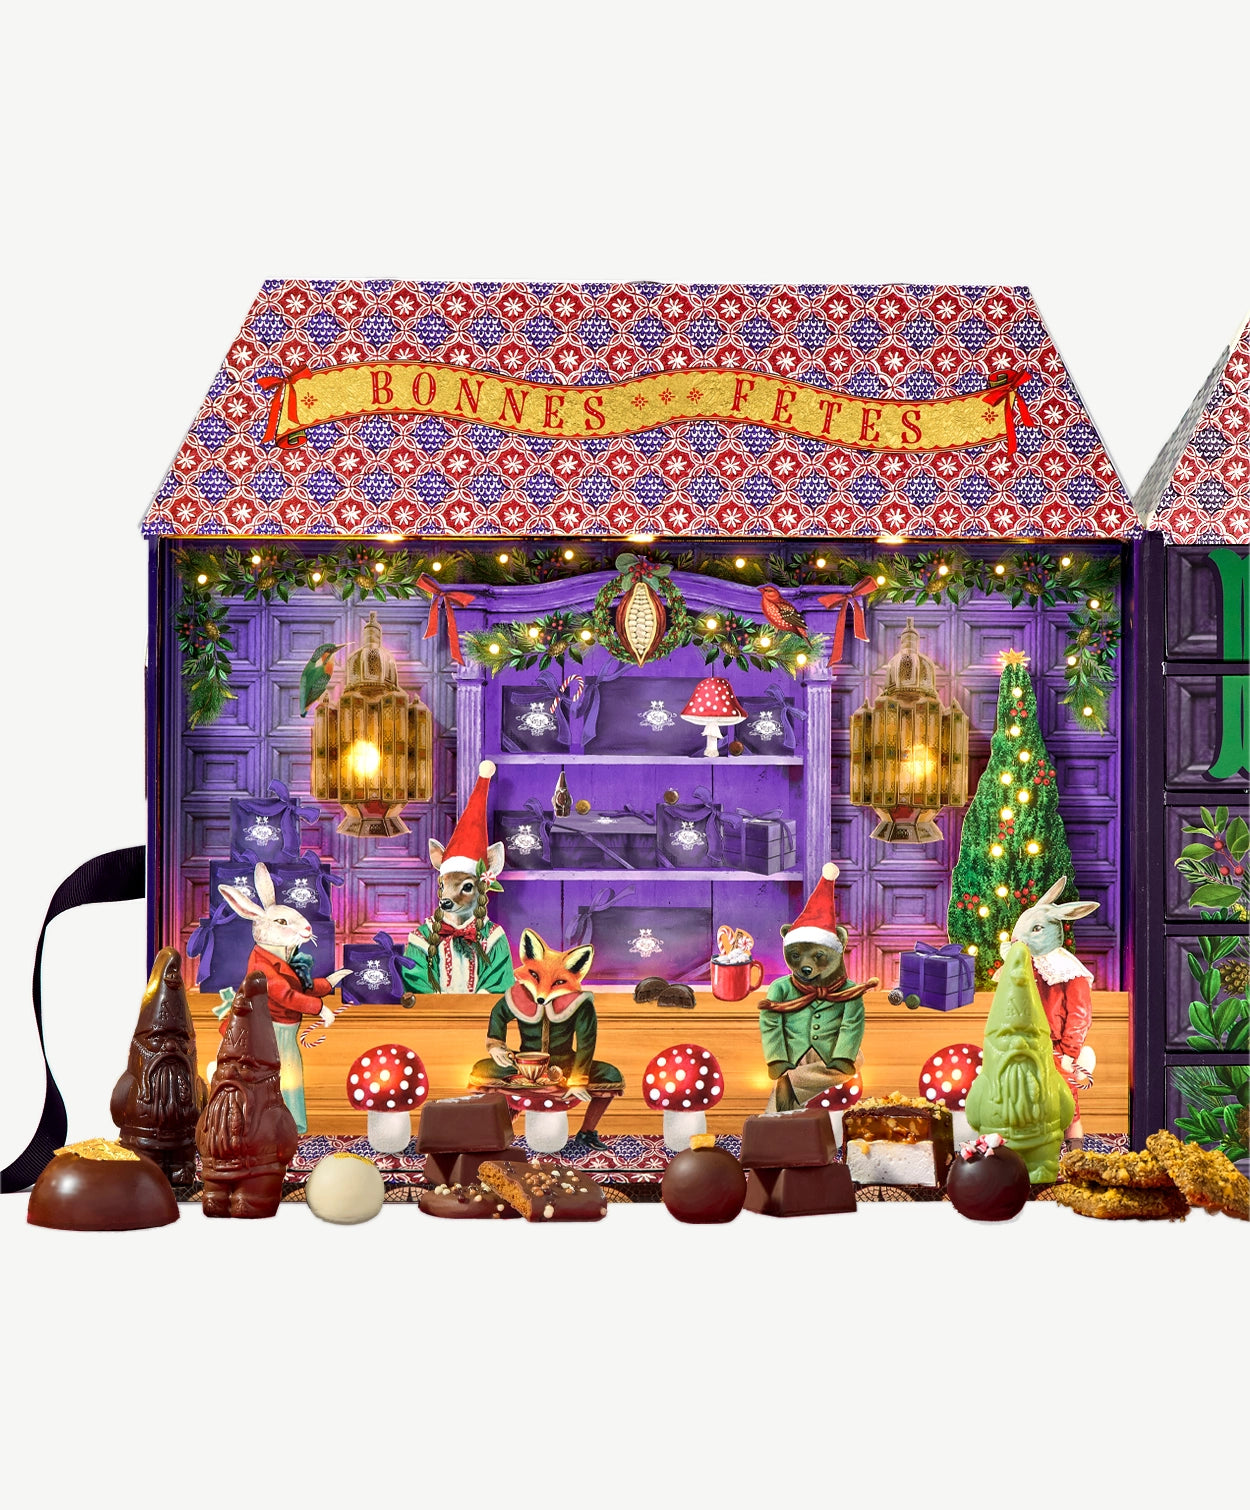 A group of woodland friends including a bear, fox, faun and two bunnies gather at the Vosges counter to enjoy holiday chocolate confections.  The cozy purple room is brightly lit with festive holiday lights, garland, holly and a regal evergreen tree.